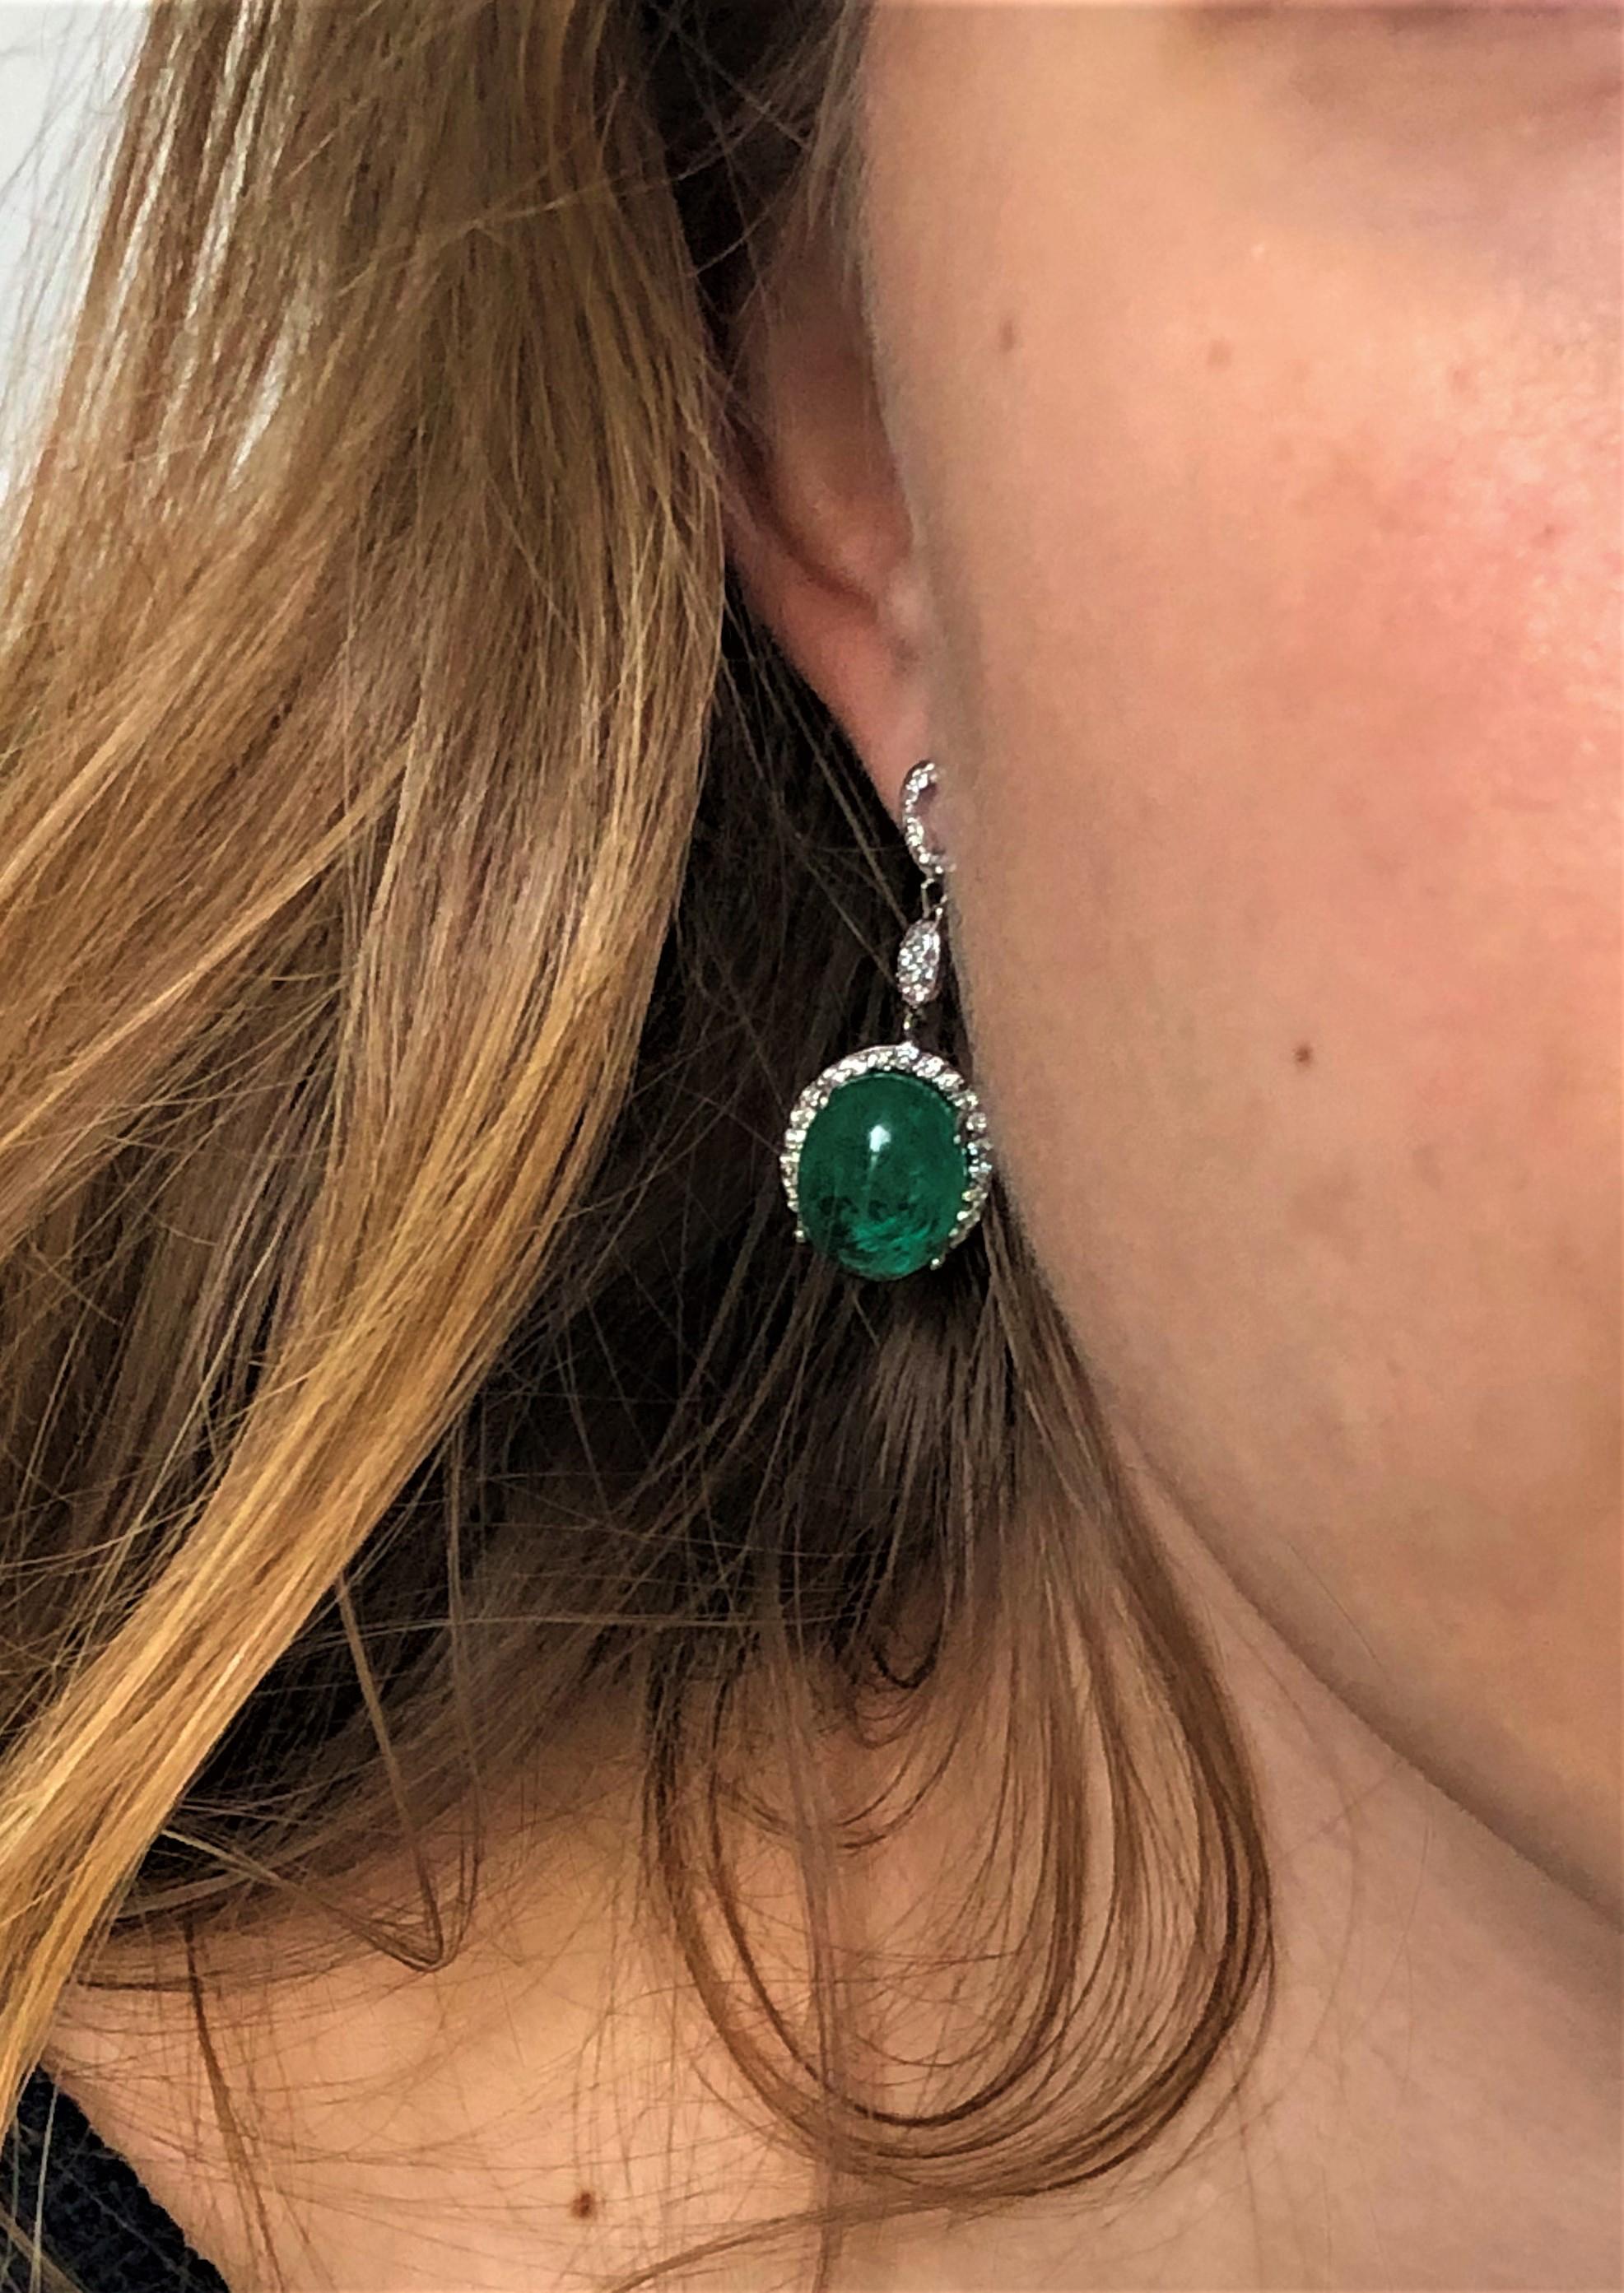 Fourteen karat white gold large cabochon emerald and diamond drop earrings 
Diamond weighing 1.45 carat
Cabochon emeralds weighing 12.76 carat 
New Earrings
One of a kind earrings 
Handmade i
Fourteen karat gold earrings are hanging off a post with